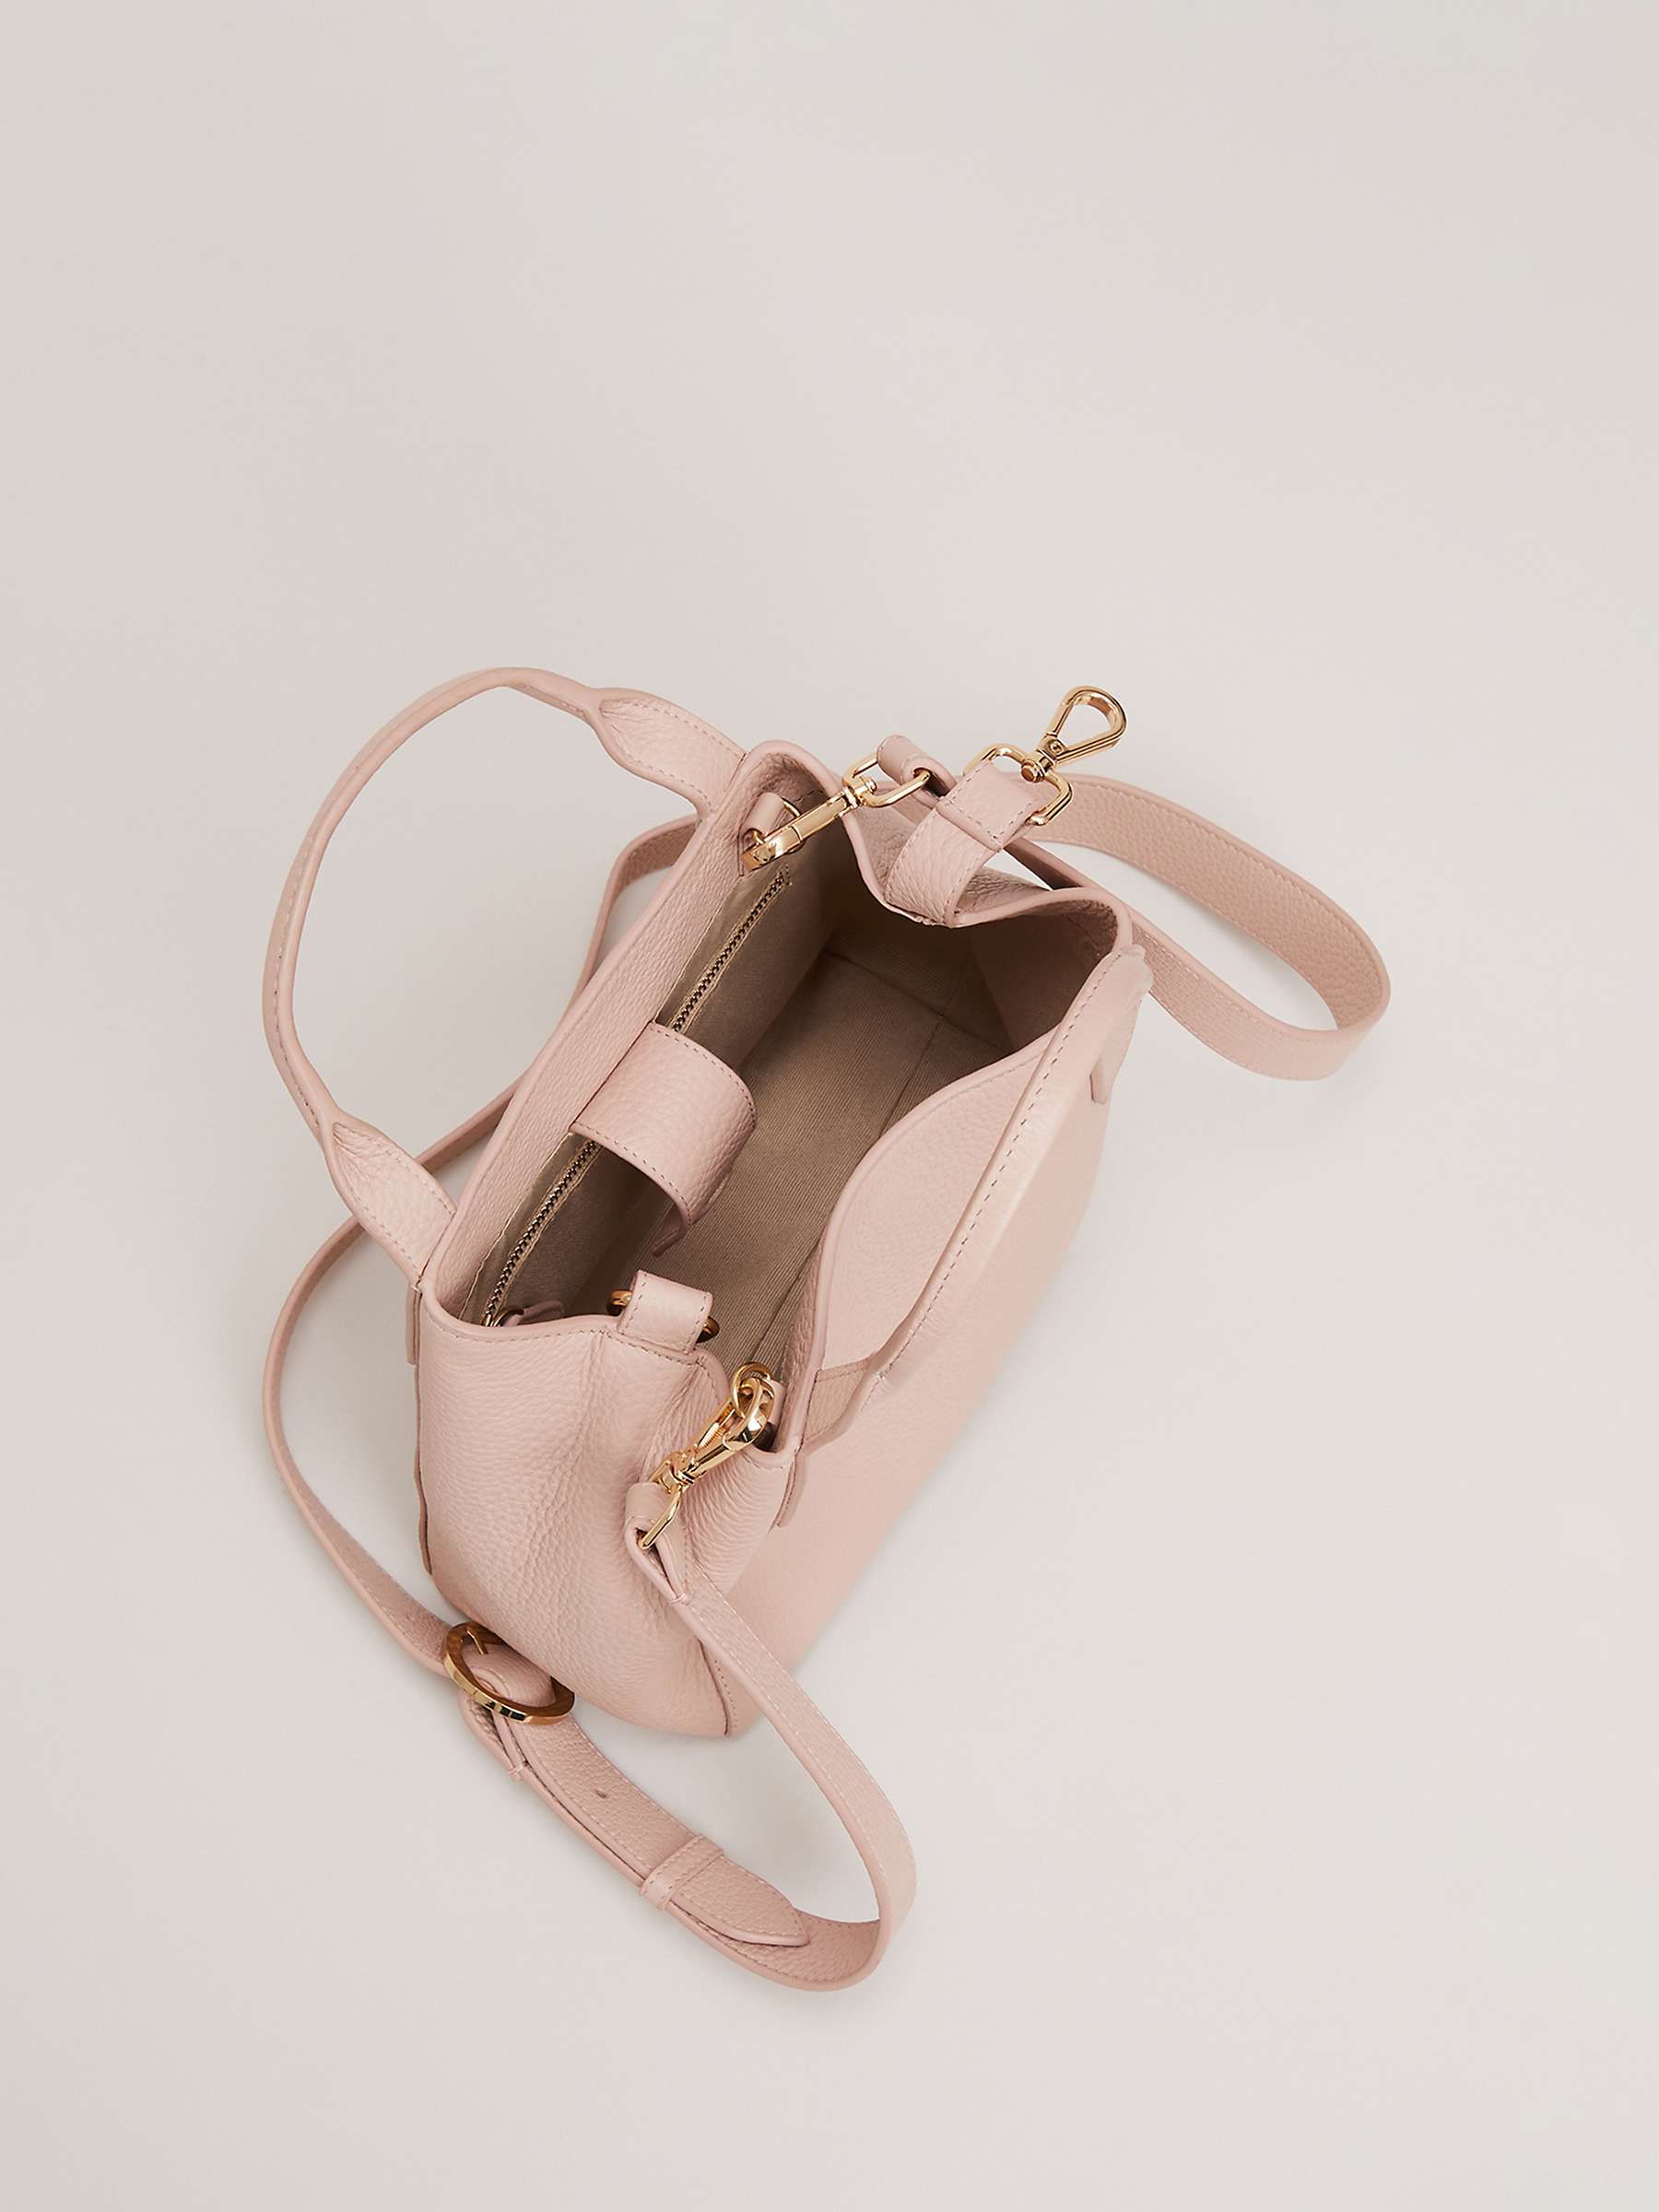 Buy Phase Eight Mini Leather Tote Bag, Pale Pink Online at johnlewis.com